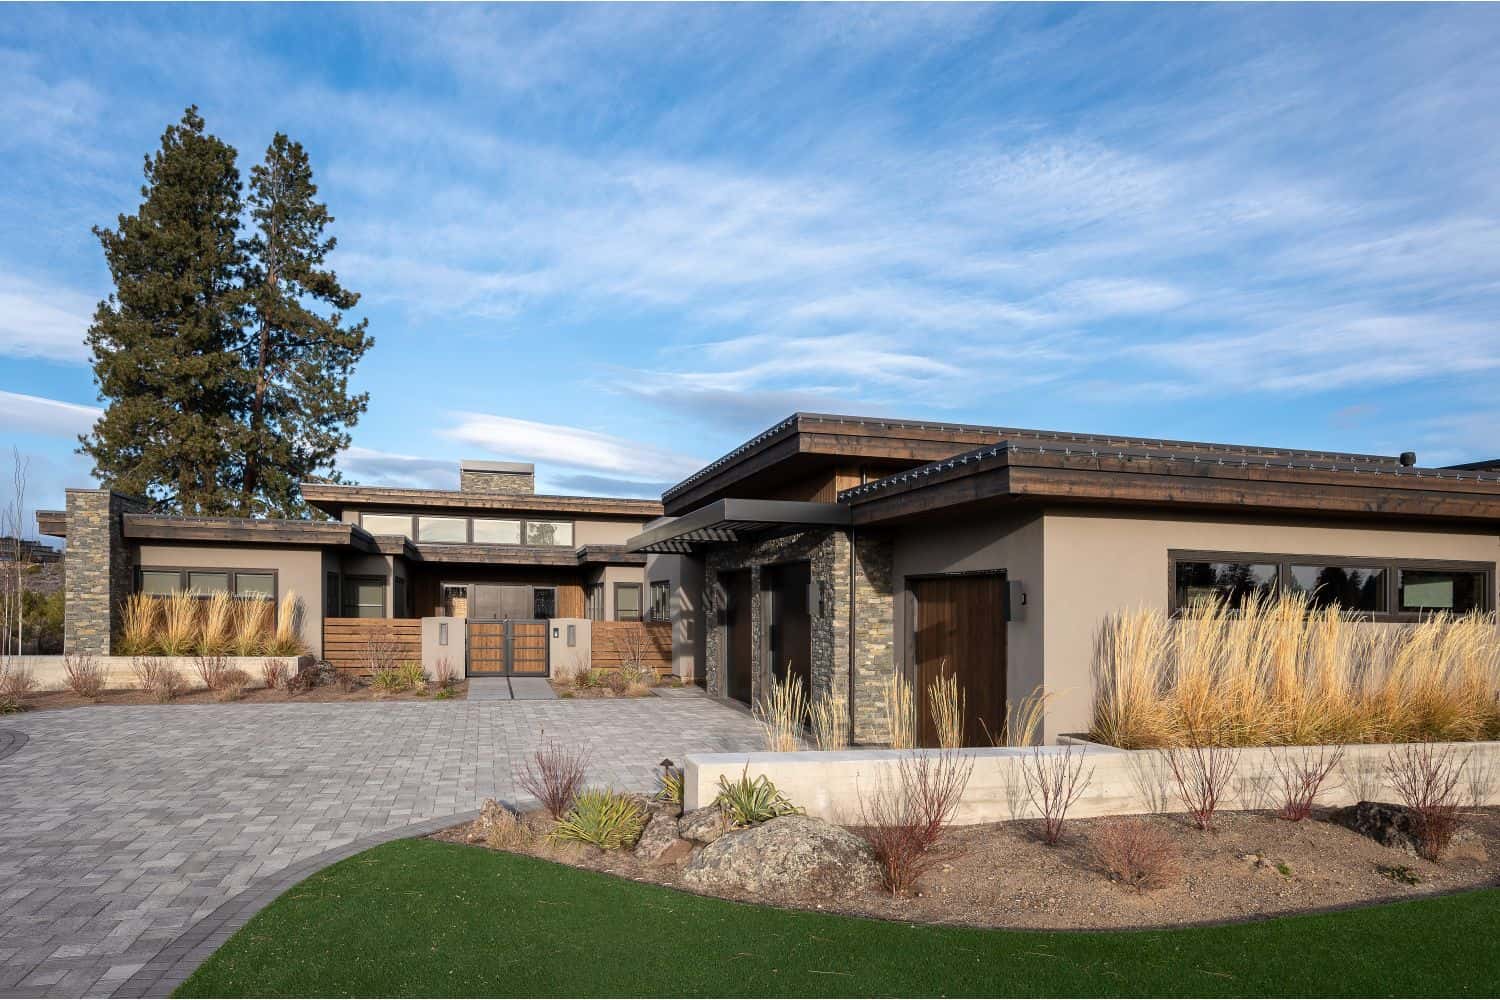 Tetherow Contemporary Warmth custom home front elevation